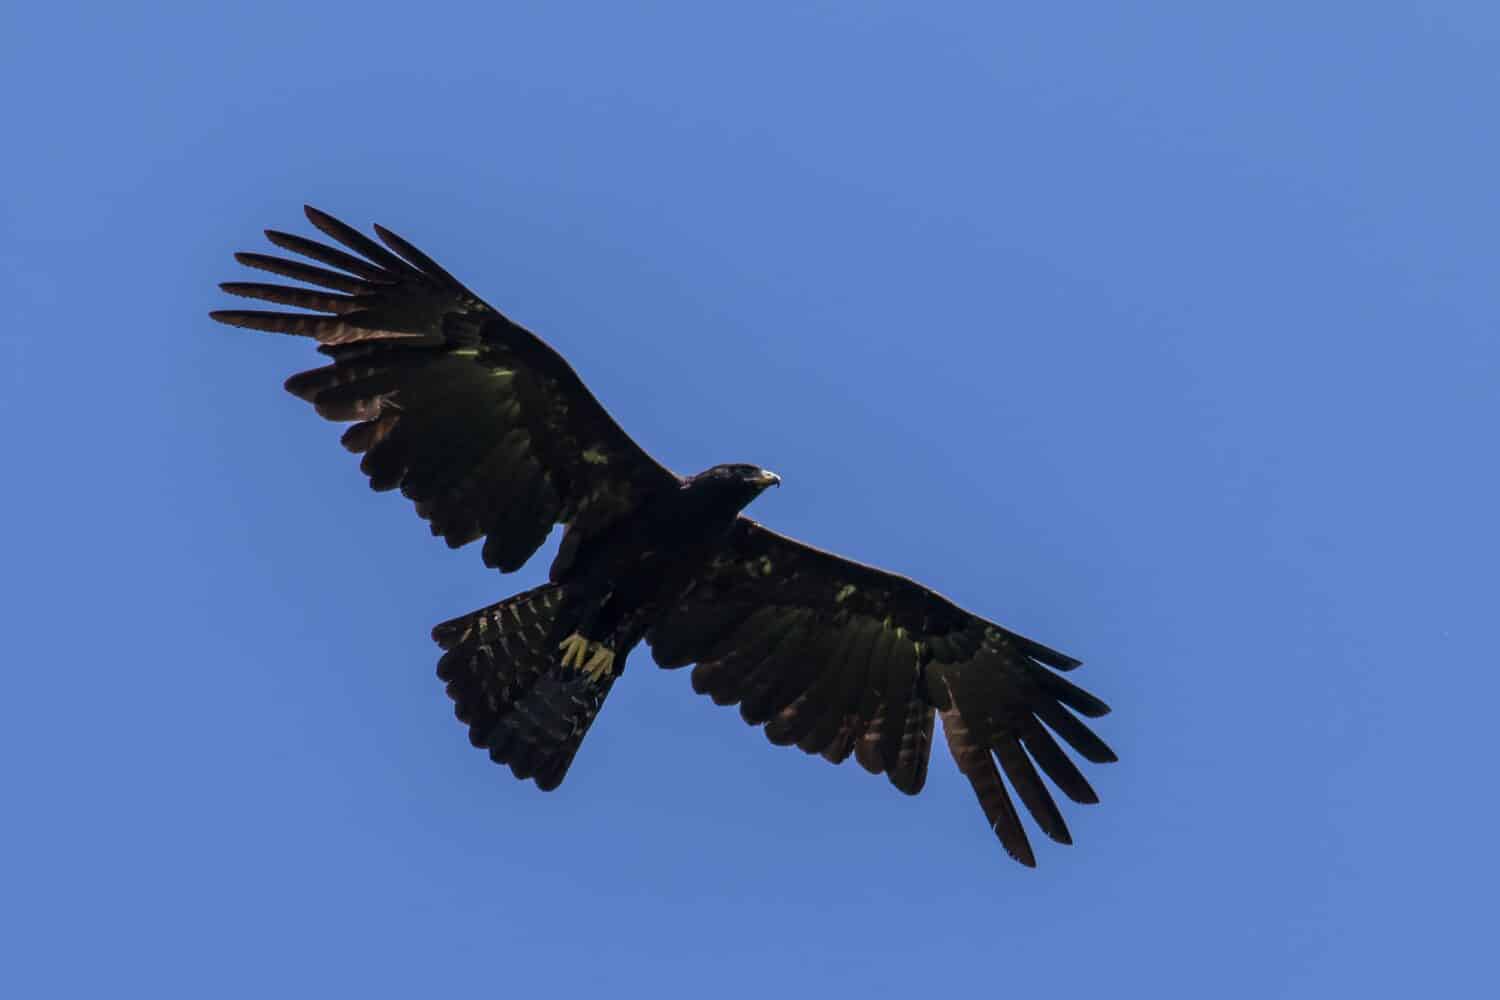 The majestic Black Eagle Ictinaetus malaiensis soaring underneath the bright blue sky